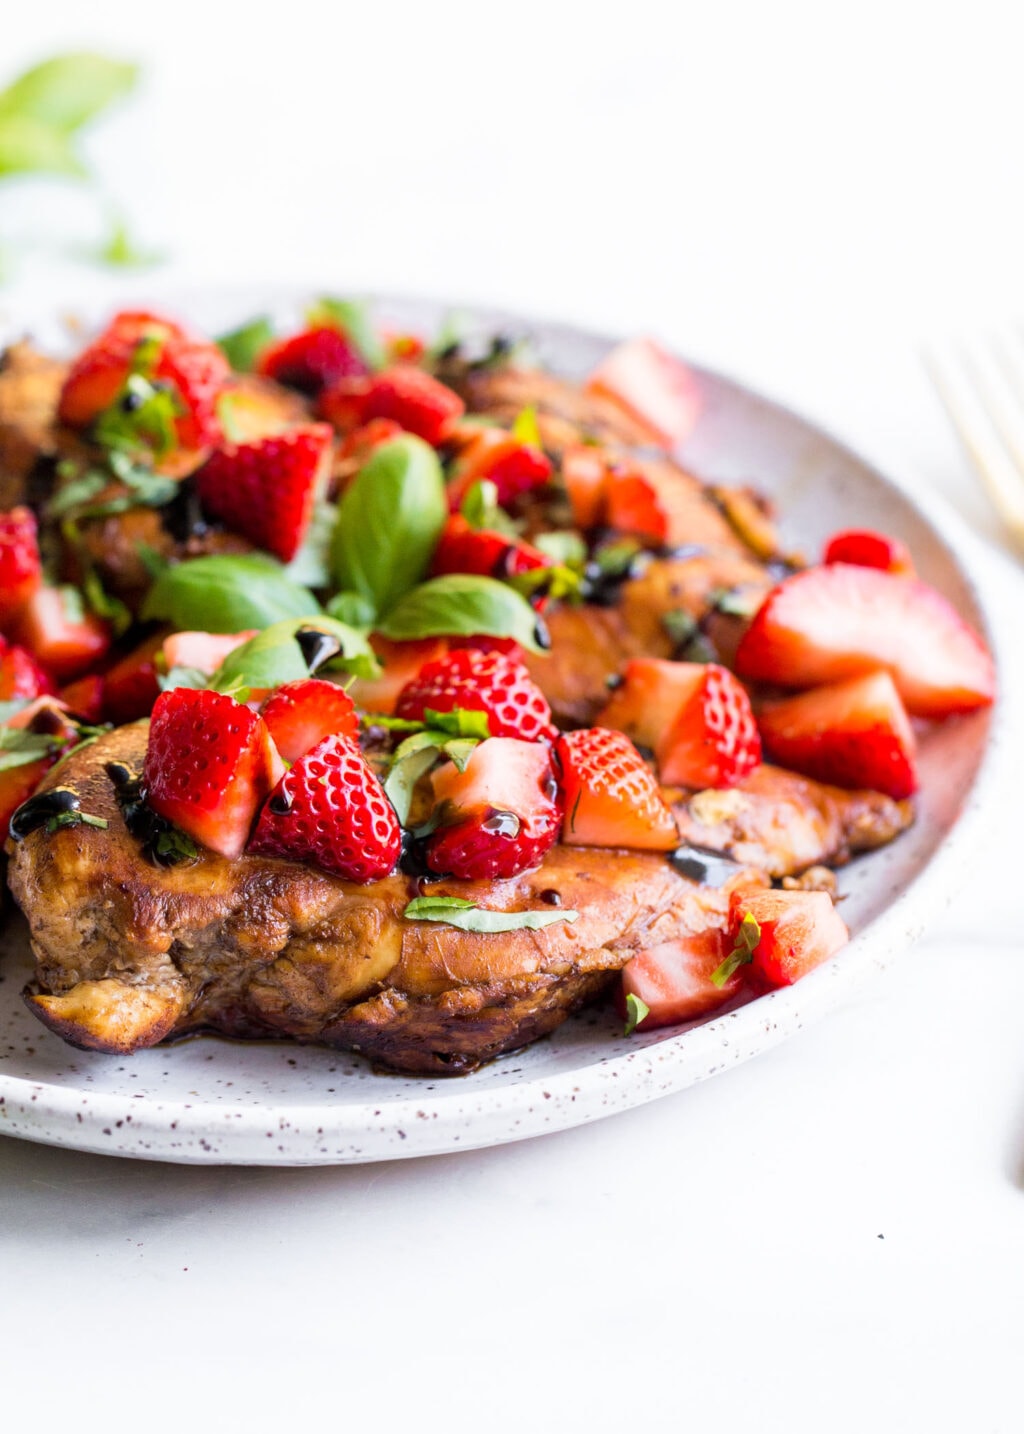 A plate with a heaping helping of the strawberry basil chicken